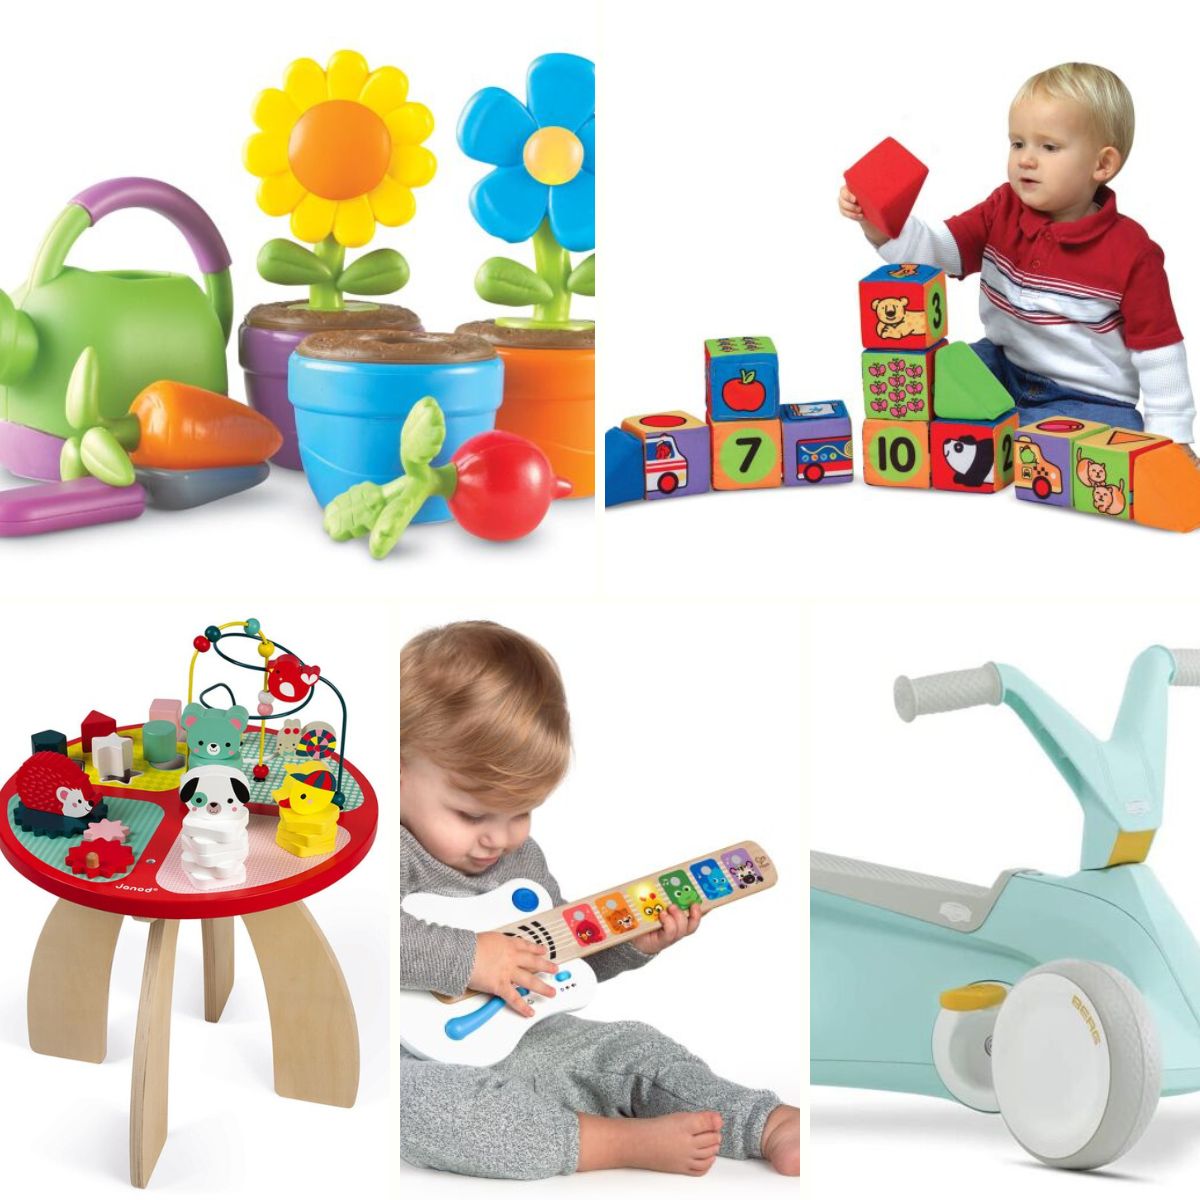 20 Best Educational Toys For 1 Year Olds from Wicked Uncle